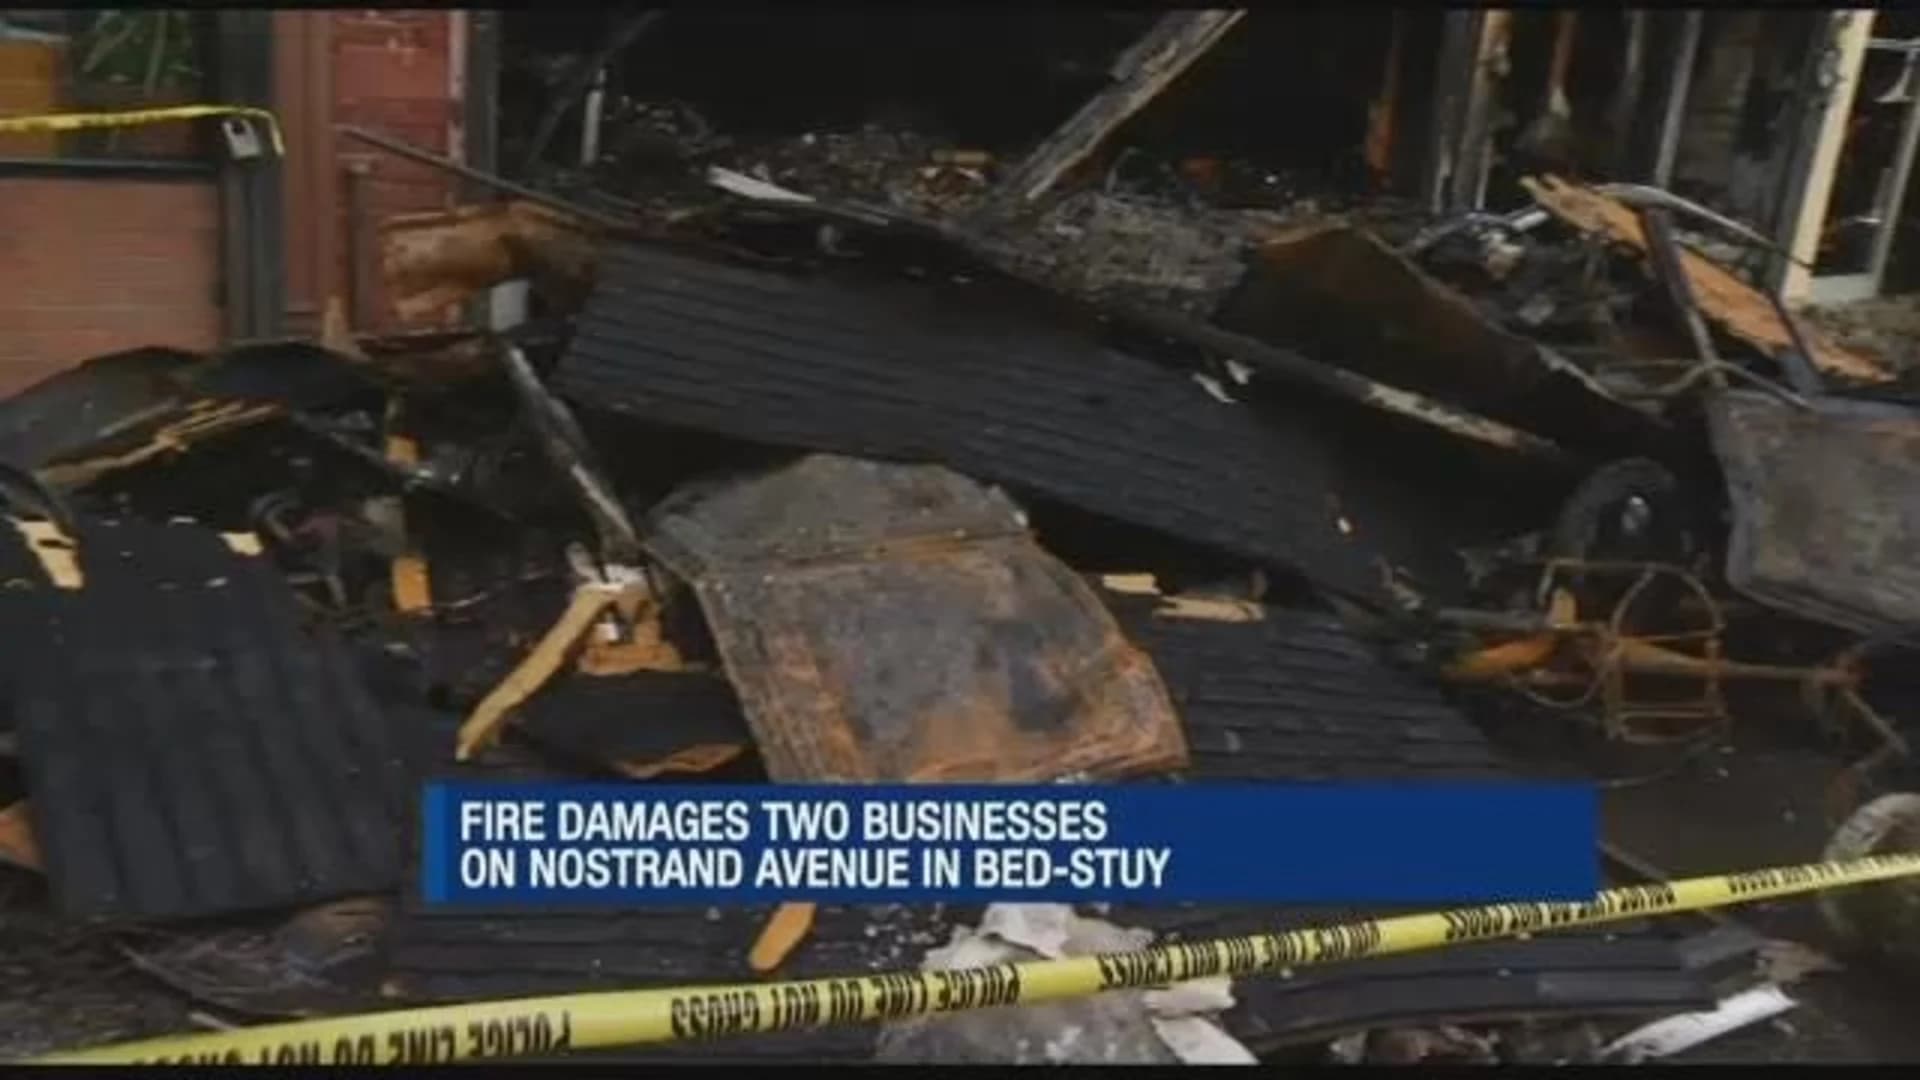 Fire severely damages Bed-Stuy businesses